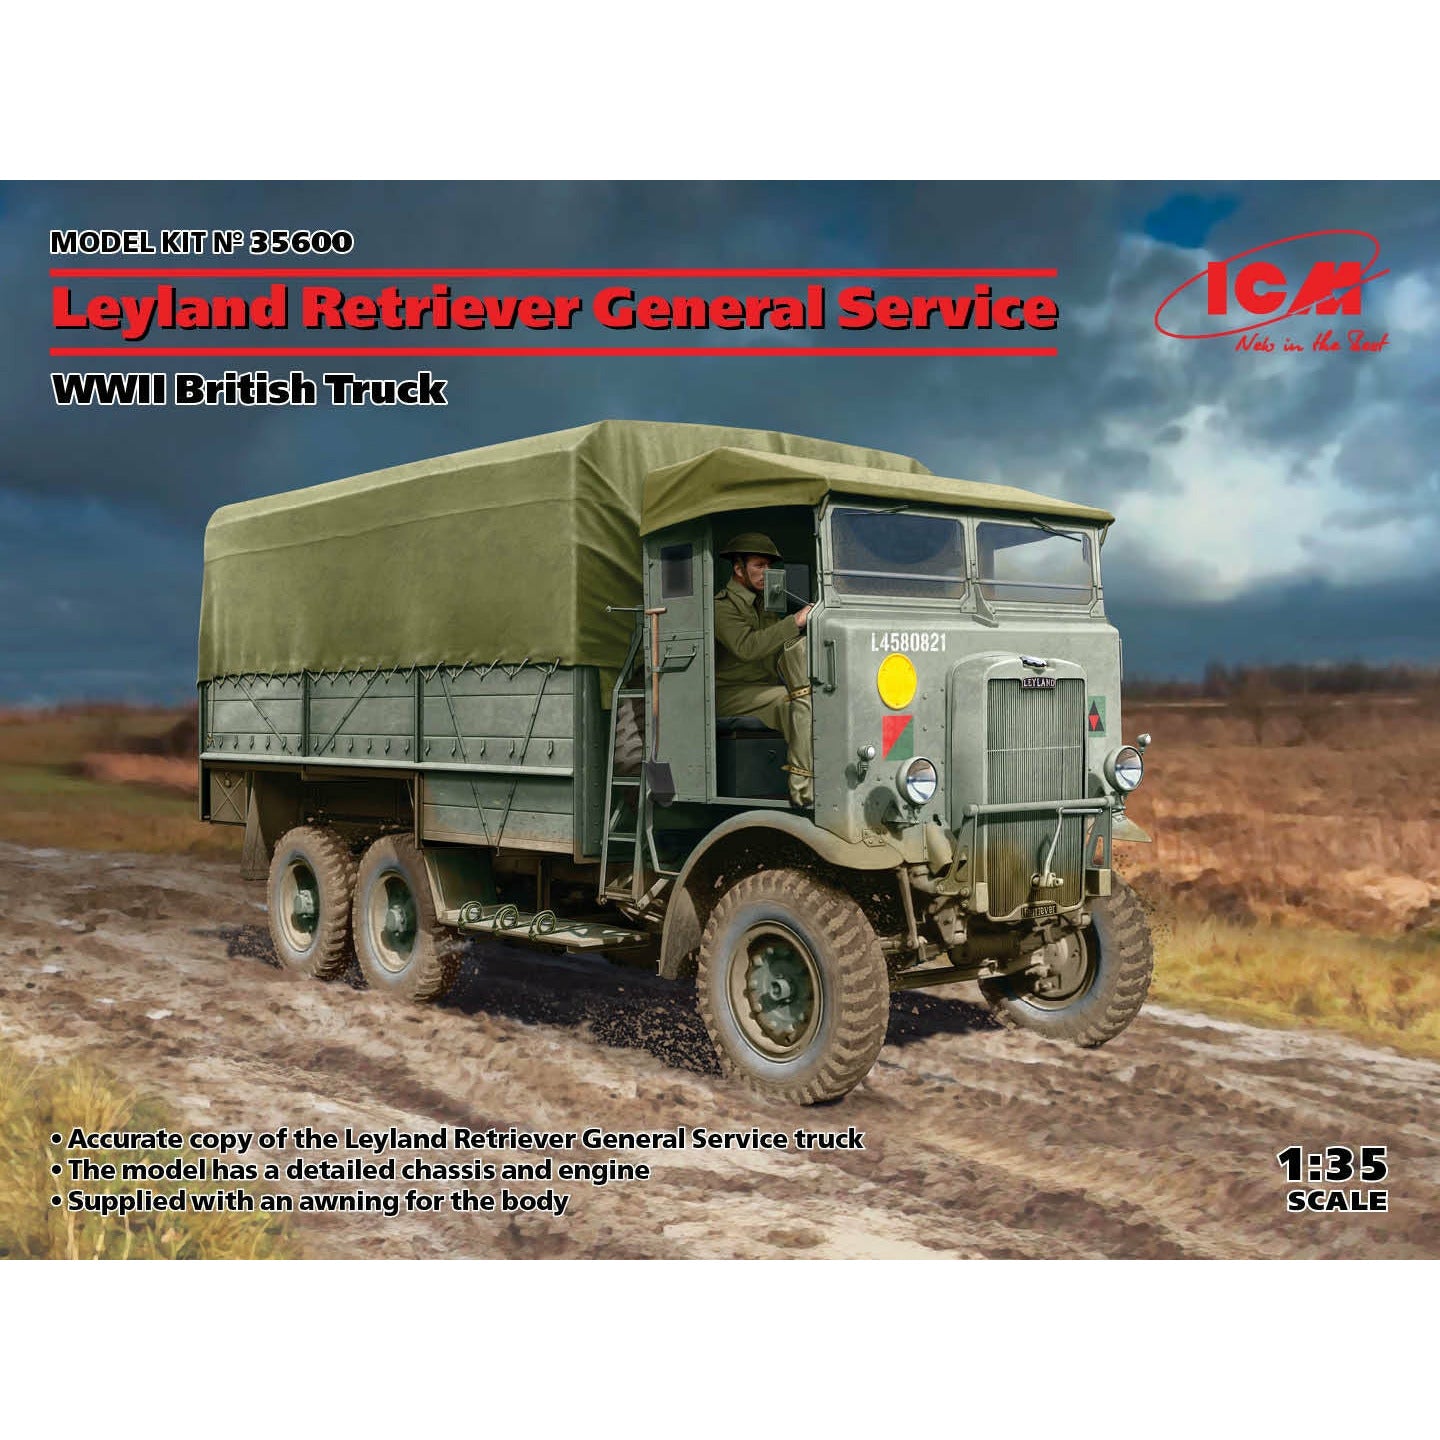 Leyland Retriever General Service WWII British Truck (100% new molds) 1/35 #35600 by ICM